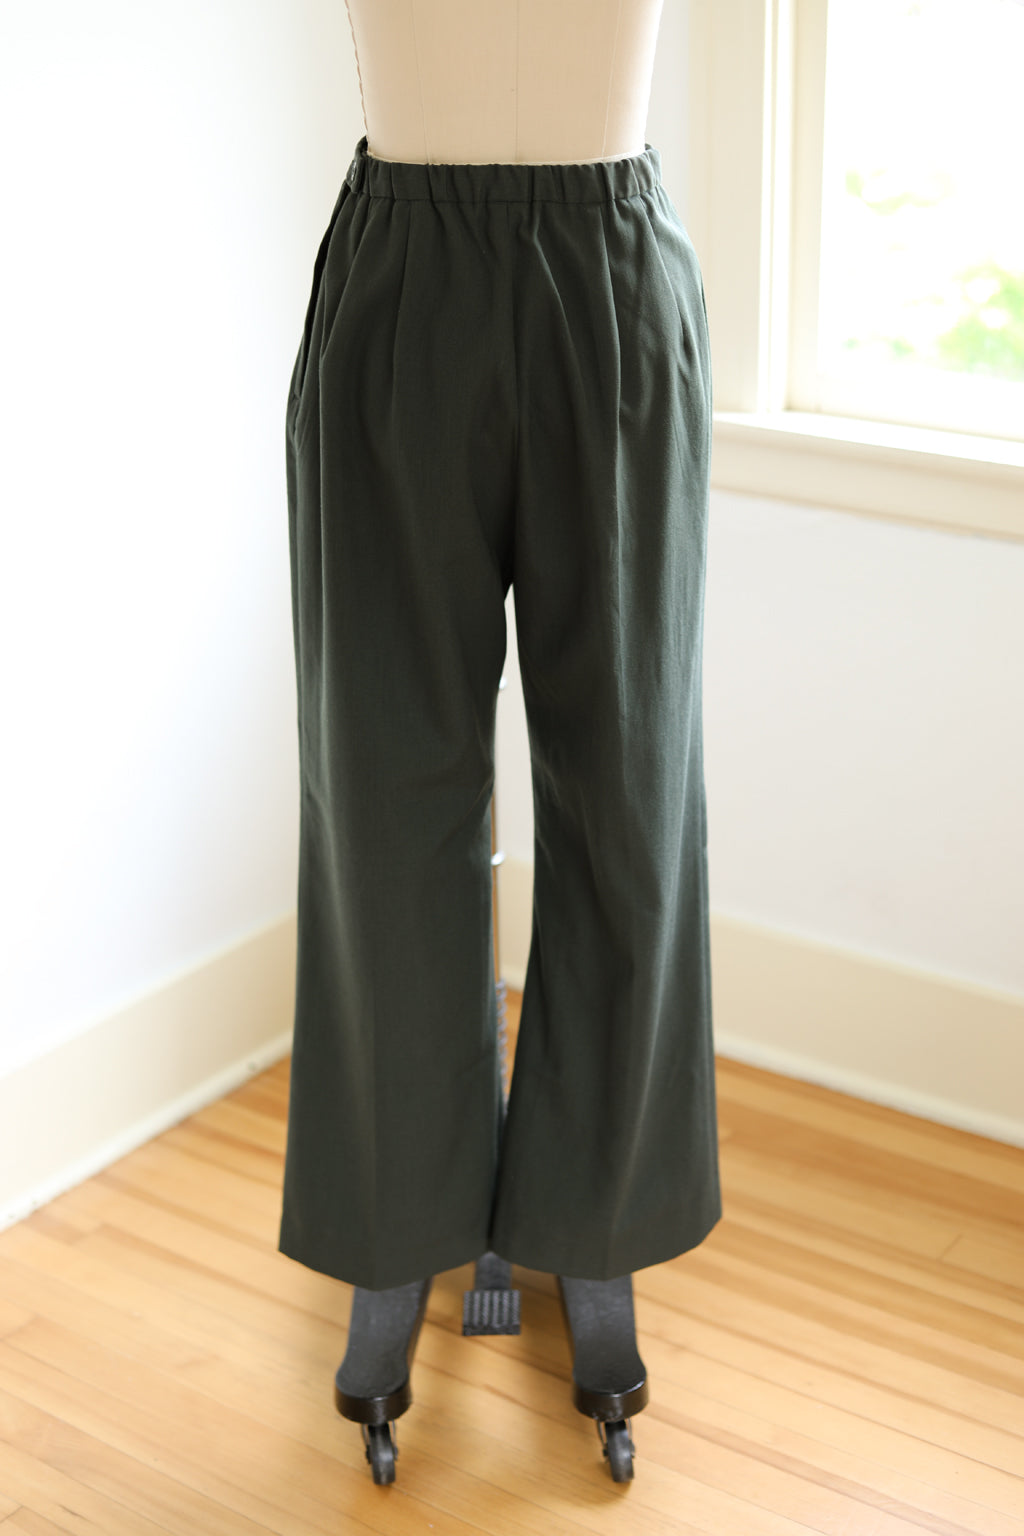 Grey High Waisted Wide Leg Trousers - 1930s & 40s style